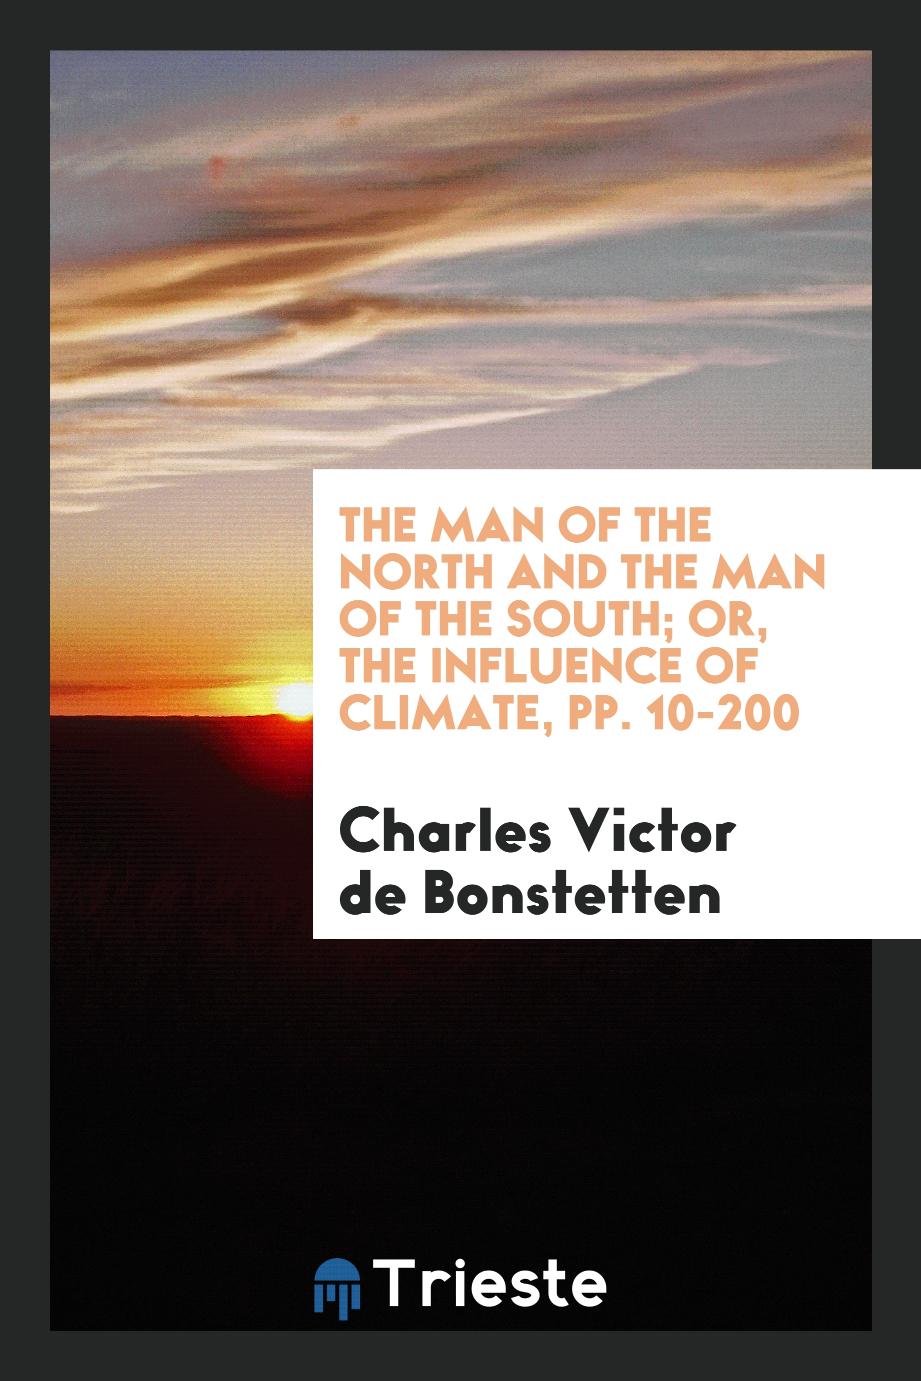 The Man of the North and the Man of the South; Or, The Influence of Climate, pp. 10-200